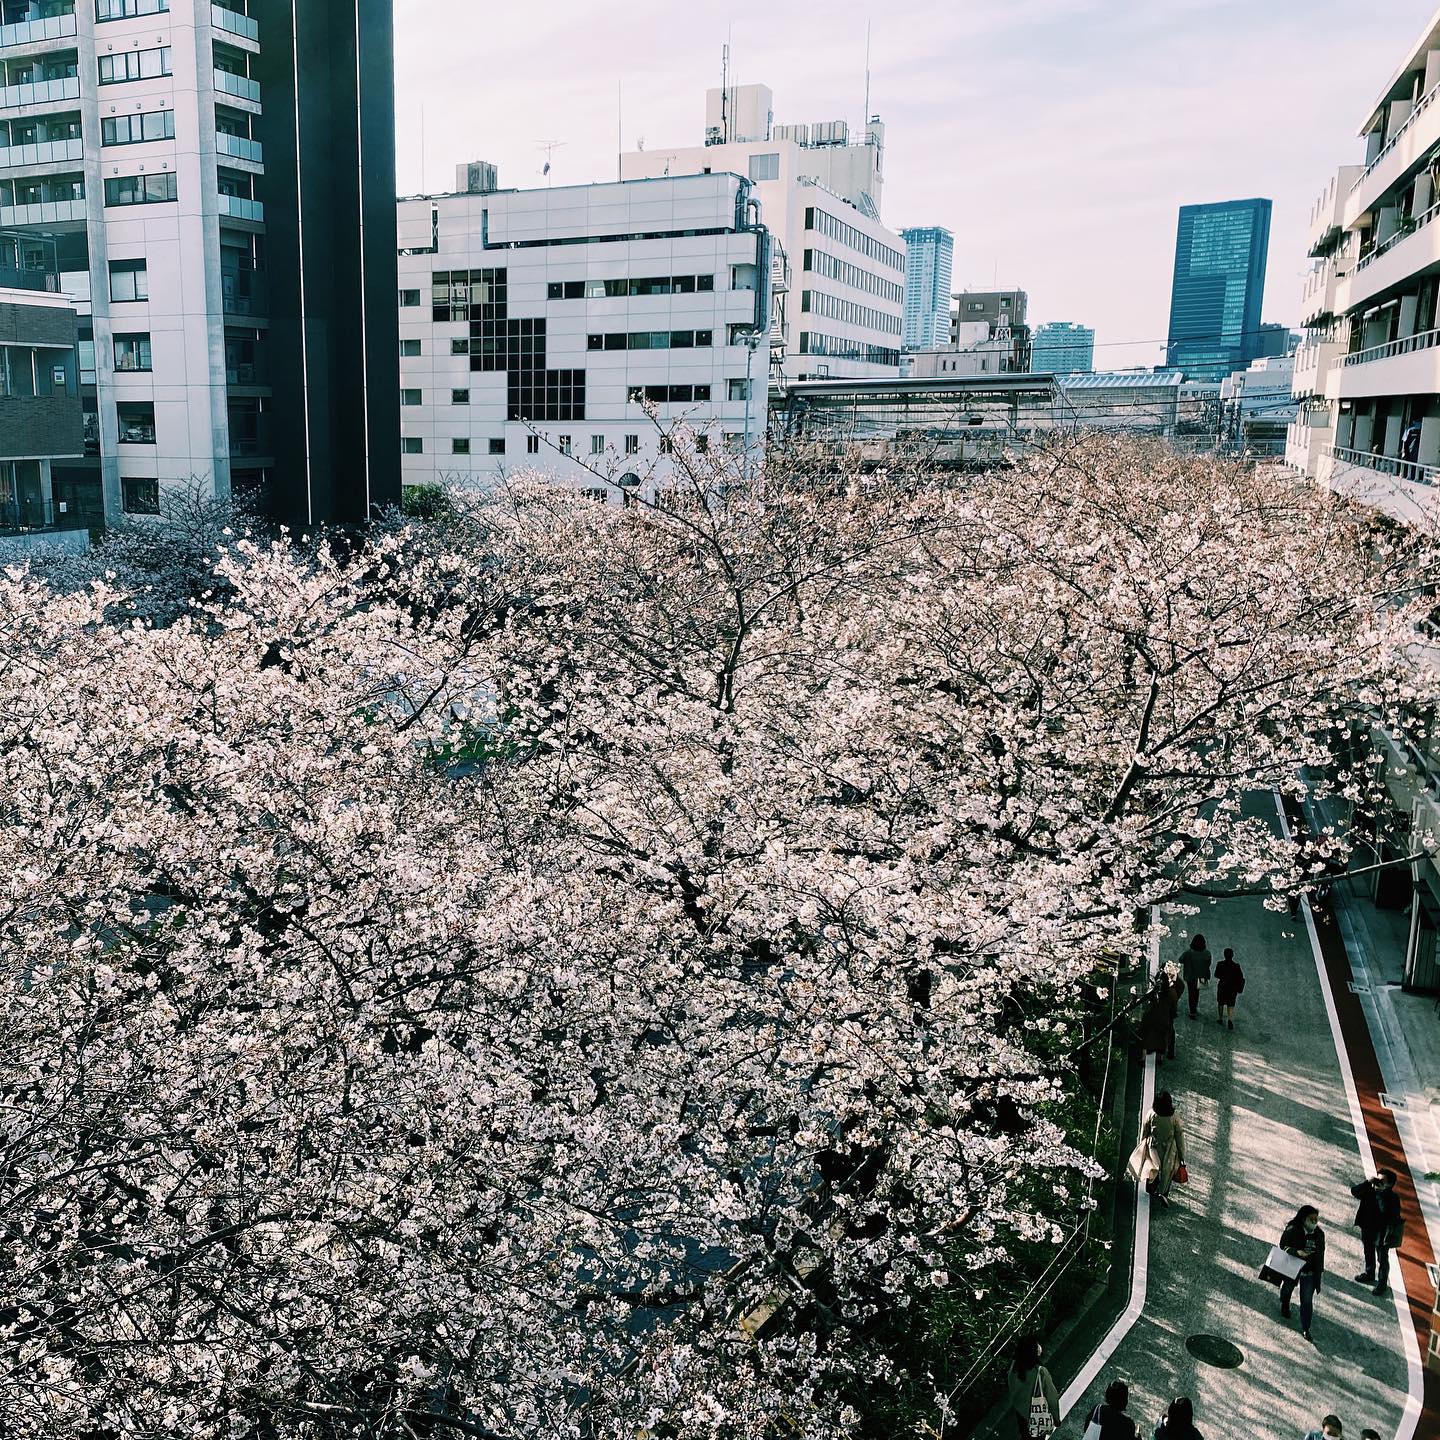 _
Cherry blossom season at the AOI Global Nakameguro office 
￼
A shot from our balcony📸
What a view

#weeklyinspiration﻿ #tokyocherryblossom⁣